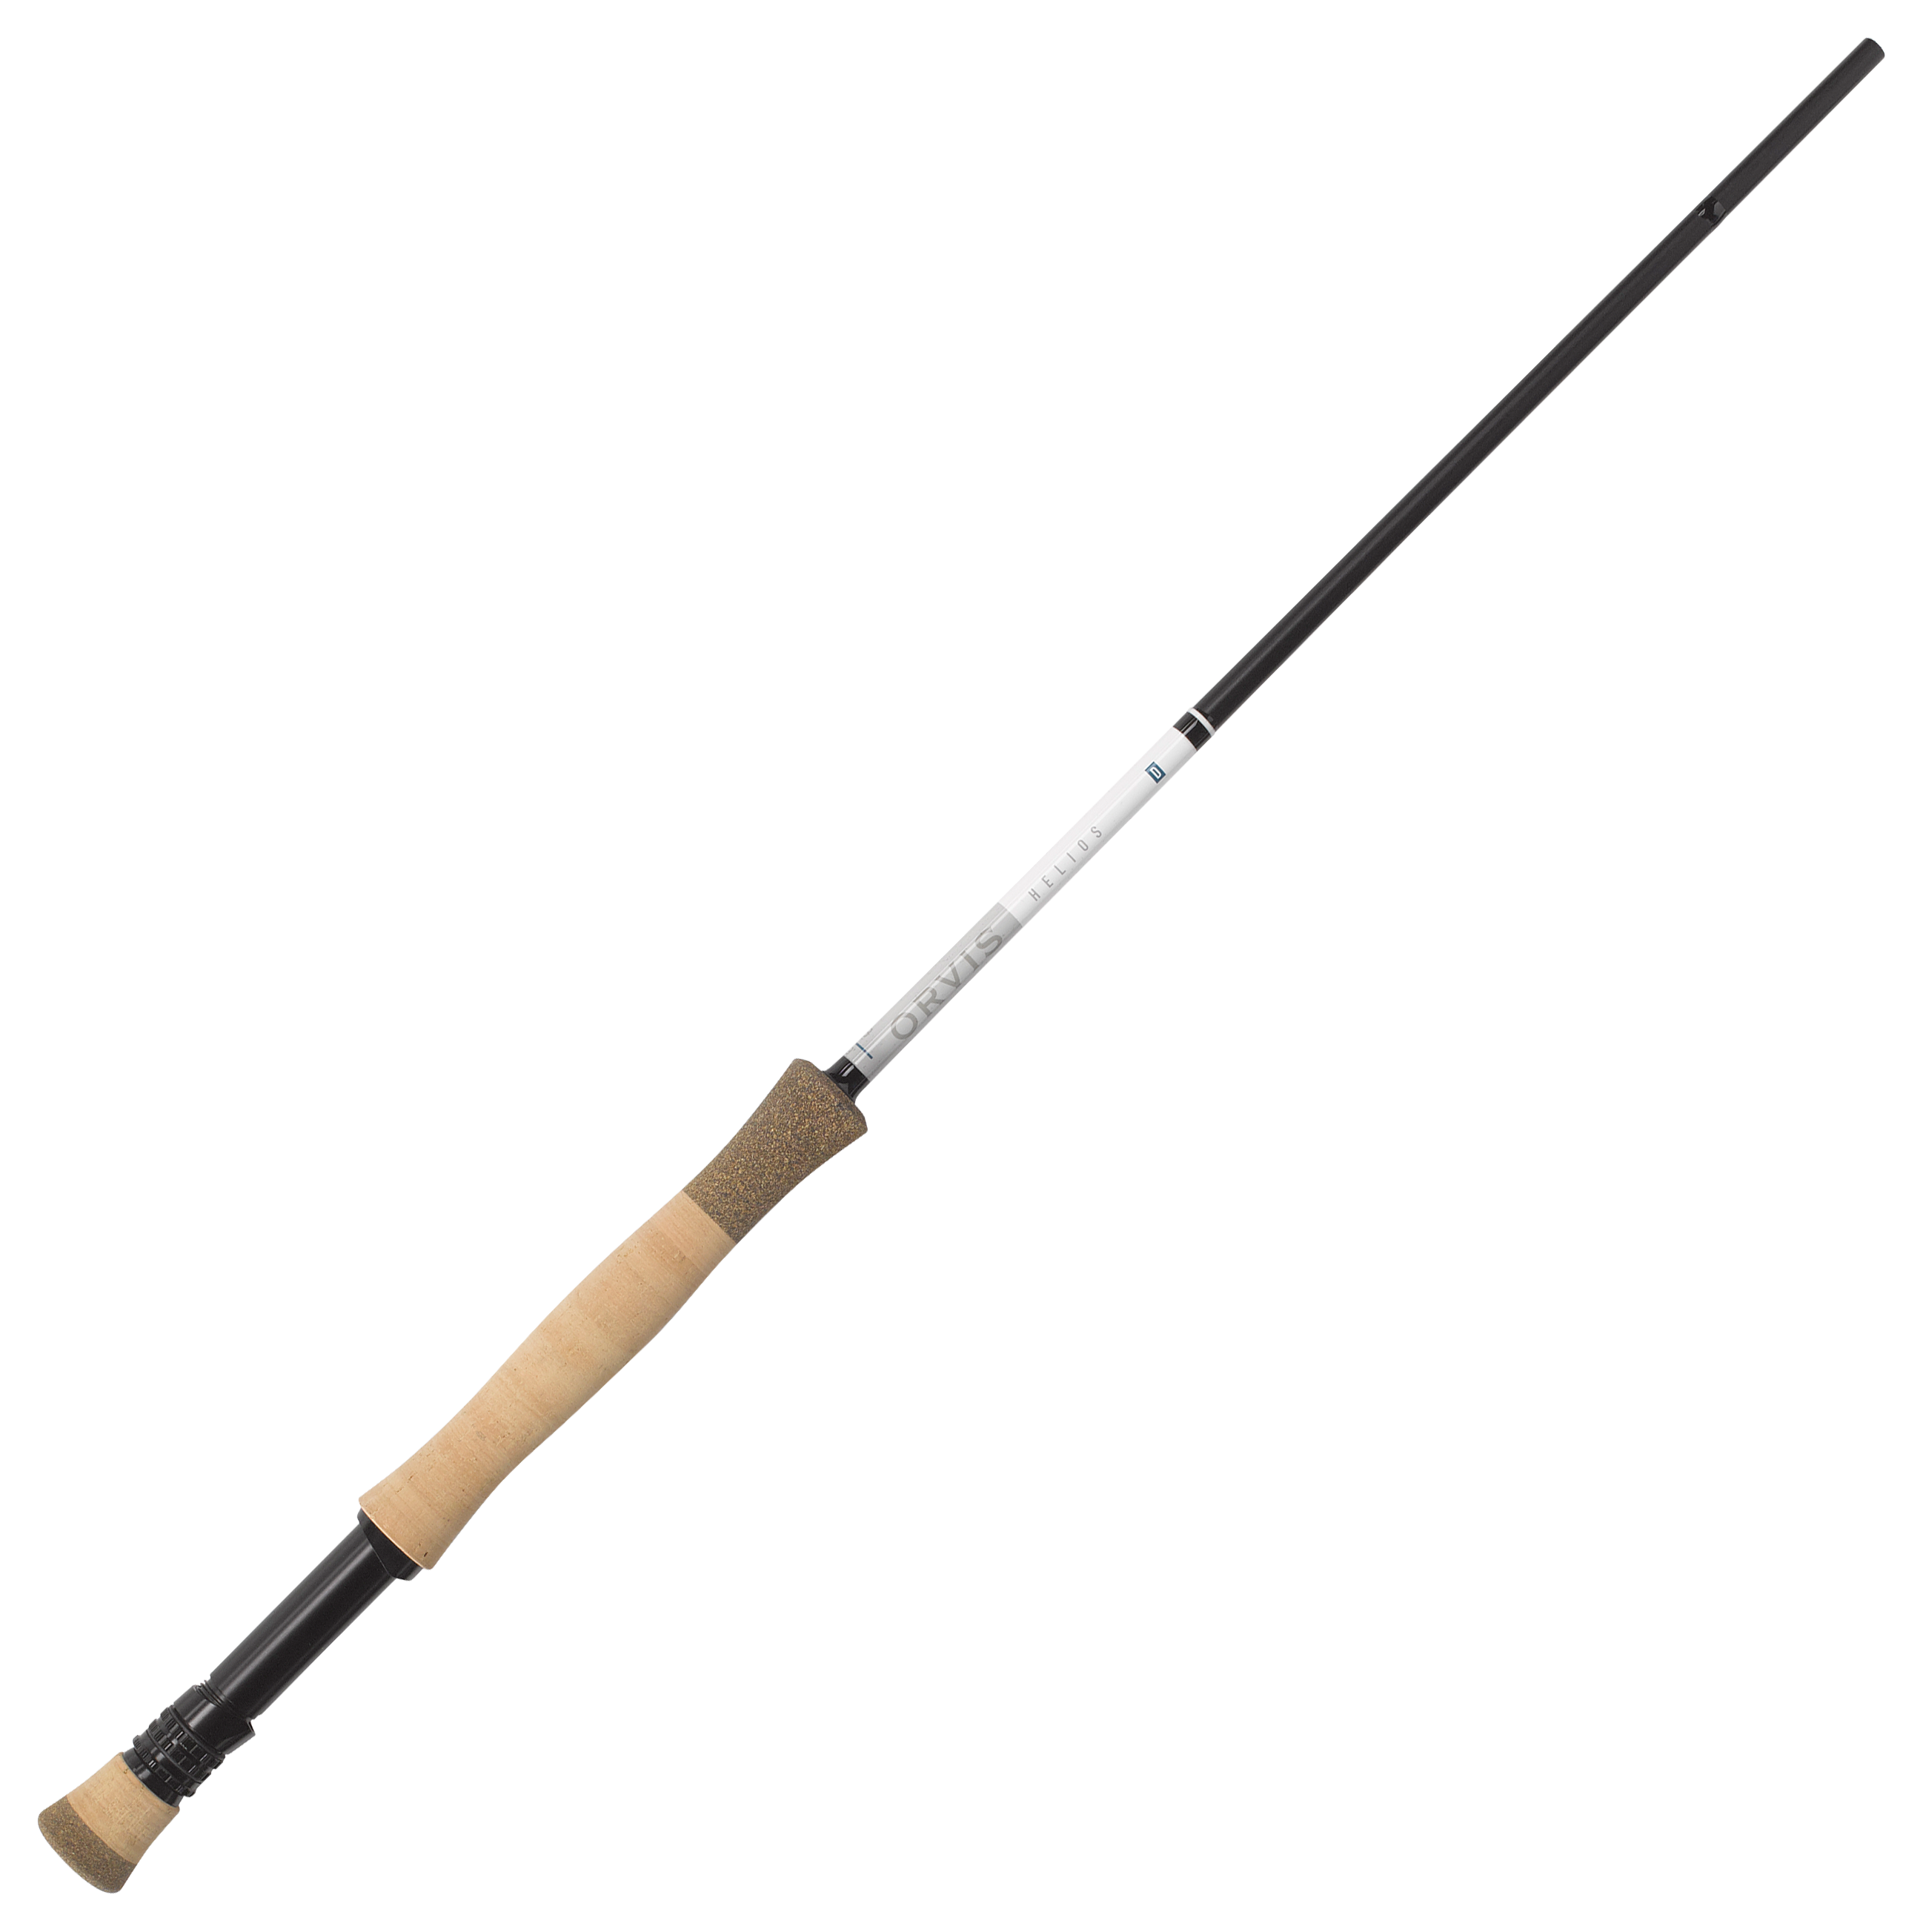 Orvis Helios D Fly Rod - Line Weight 10 - 10'